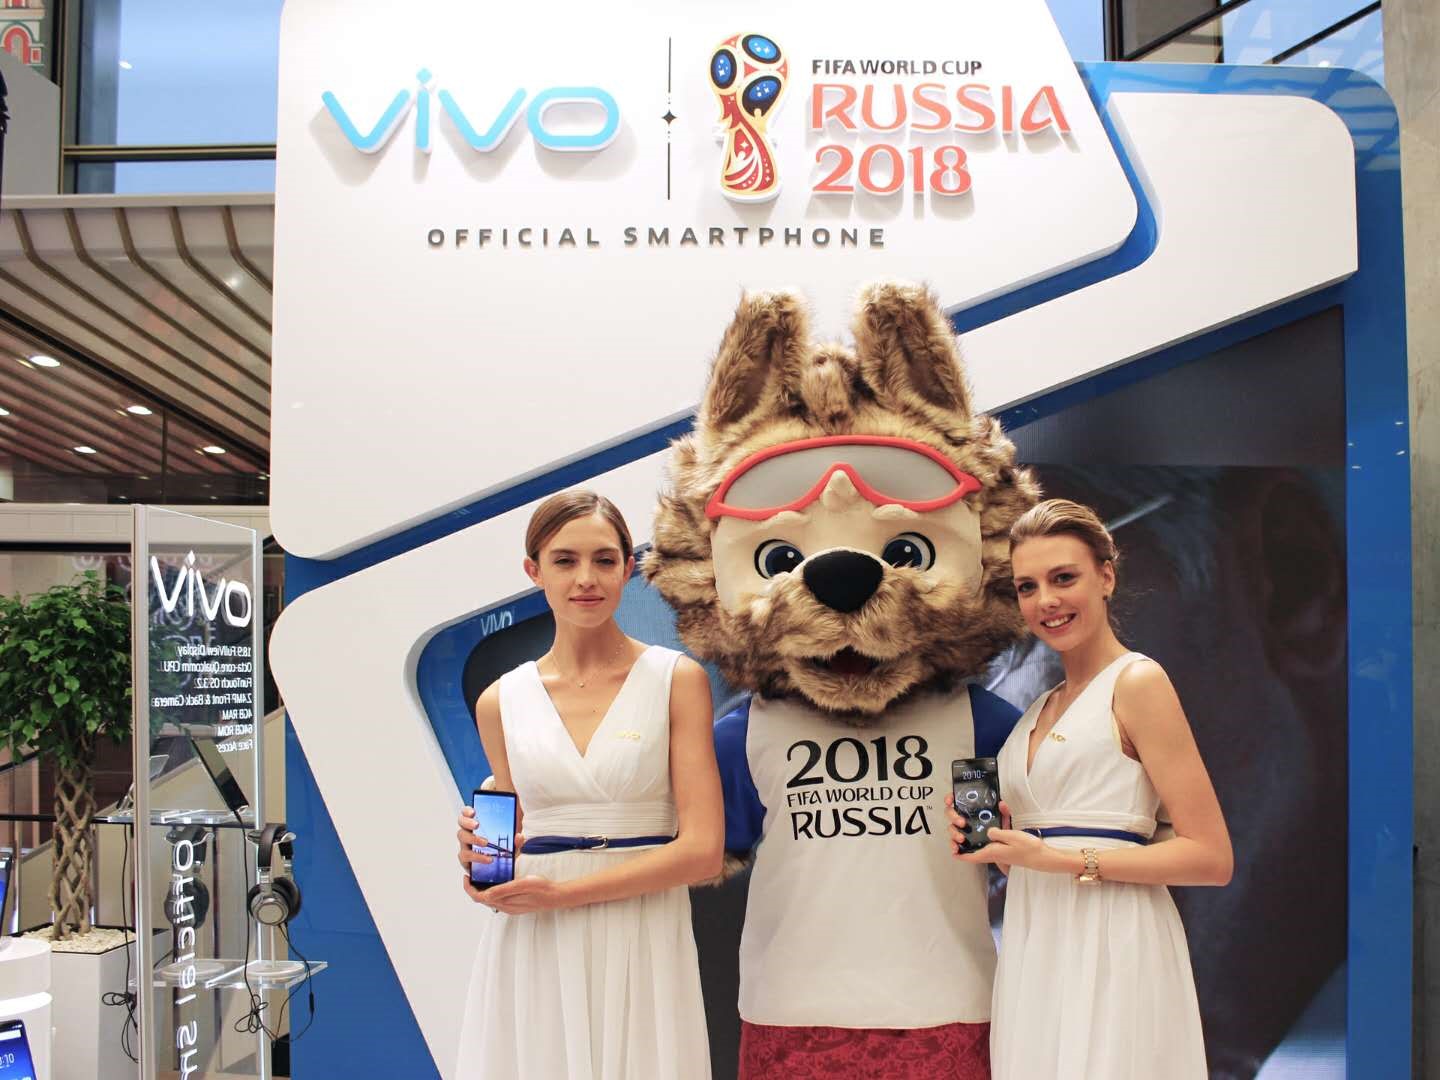 Vivo Reveals a Special Edition Smartphone for 2018 FIFA World Cup Russia™